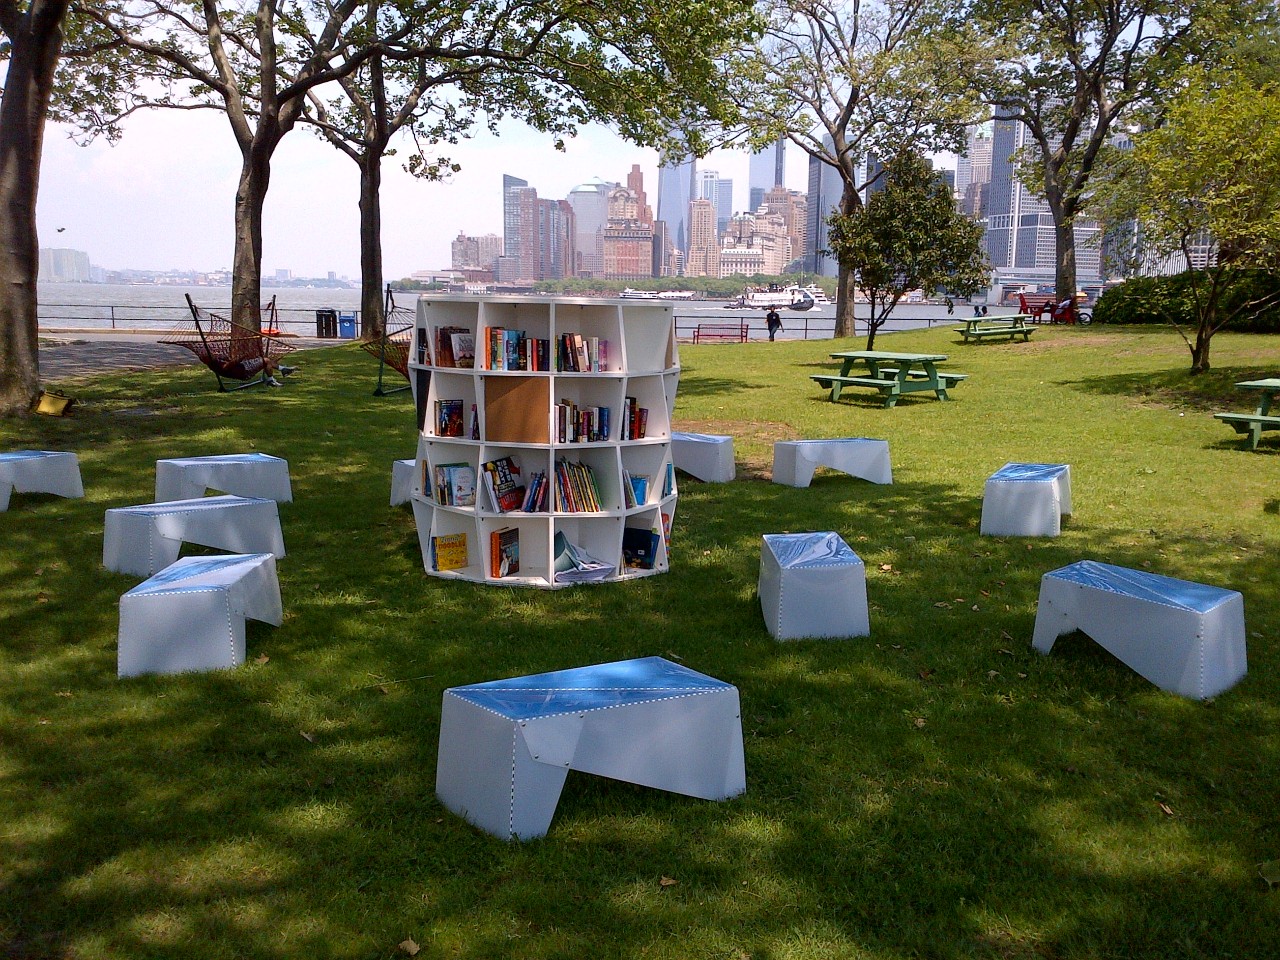 Is this not ridiculously cool, or what? NYPL has partnered with Brooklyn Public Library and Queens Library to provide this outdoor reading room (known as the Library Lawn) on beautiful Governors Island this summer. The pop-up library will be open on...